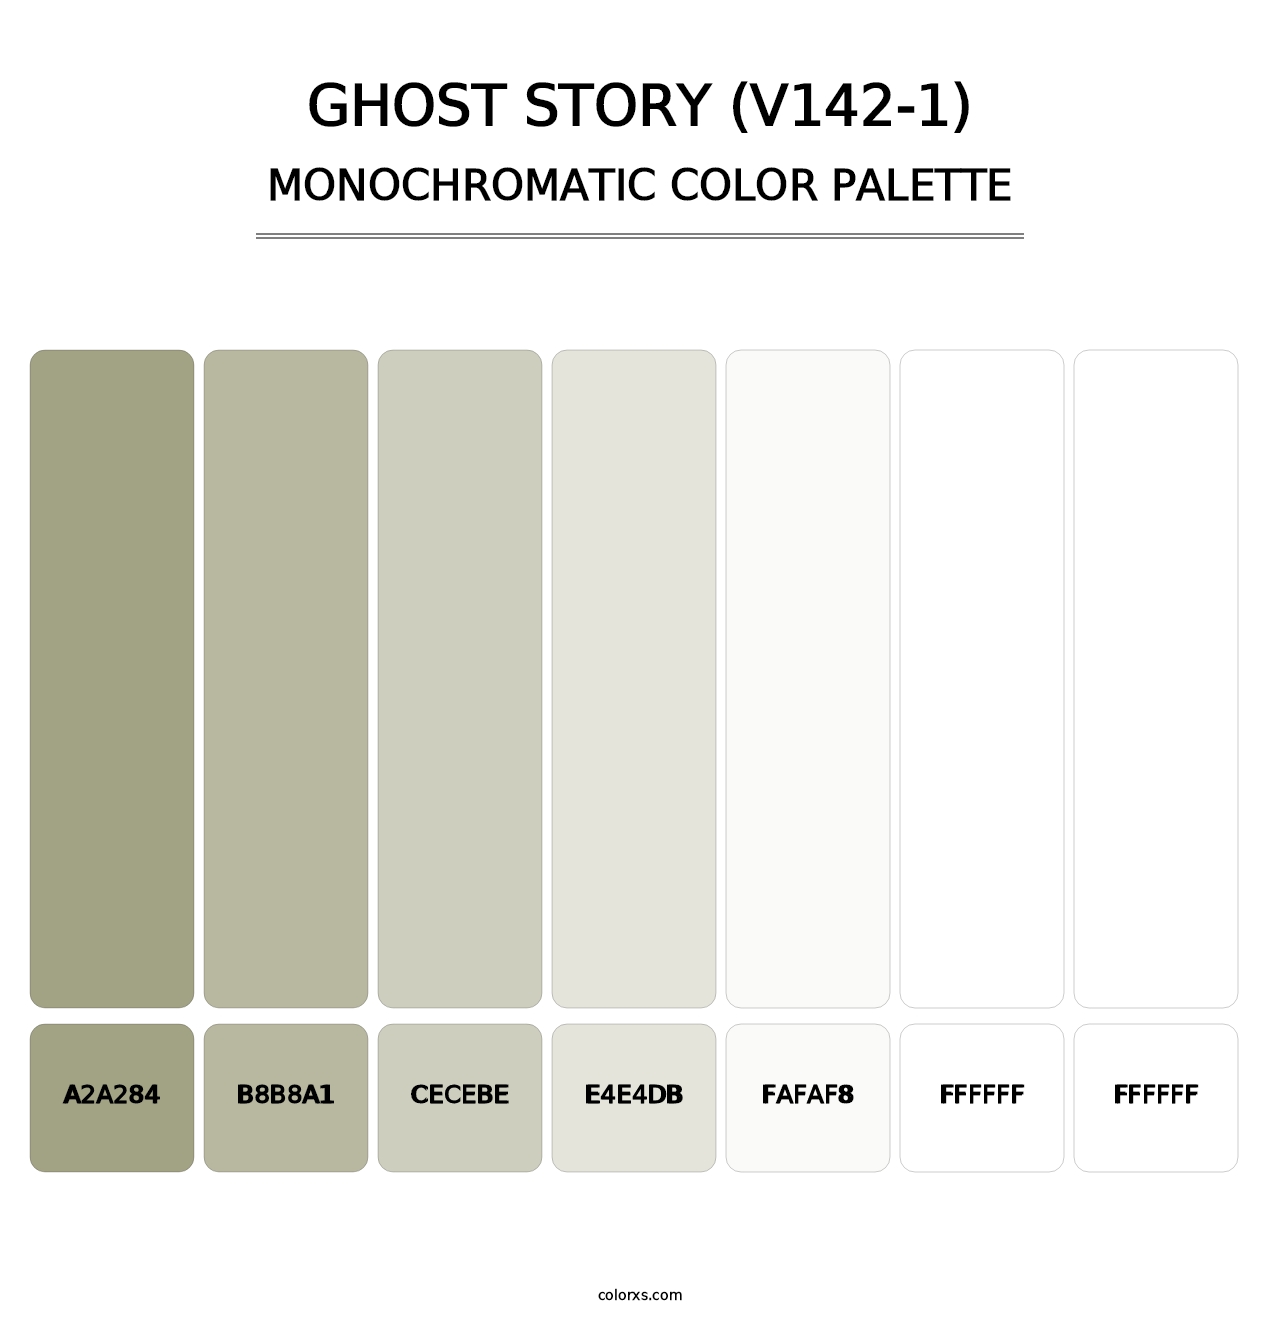 Ghost Story (V142-1) - Monochromatic Color Palette